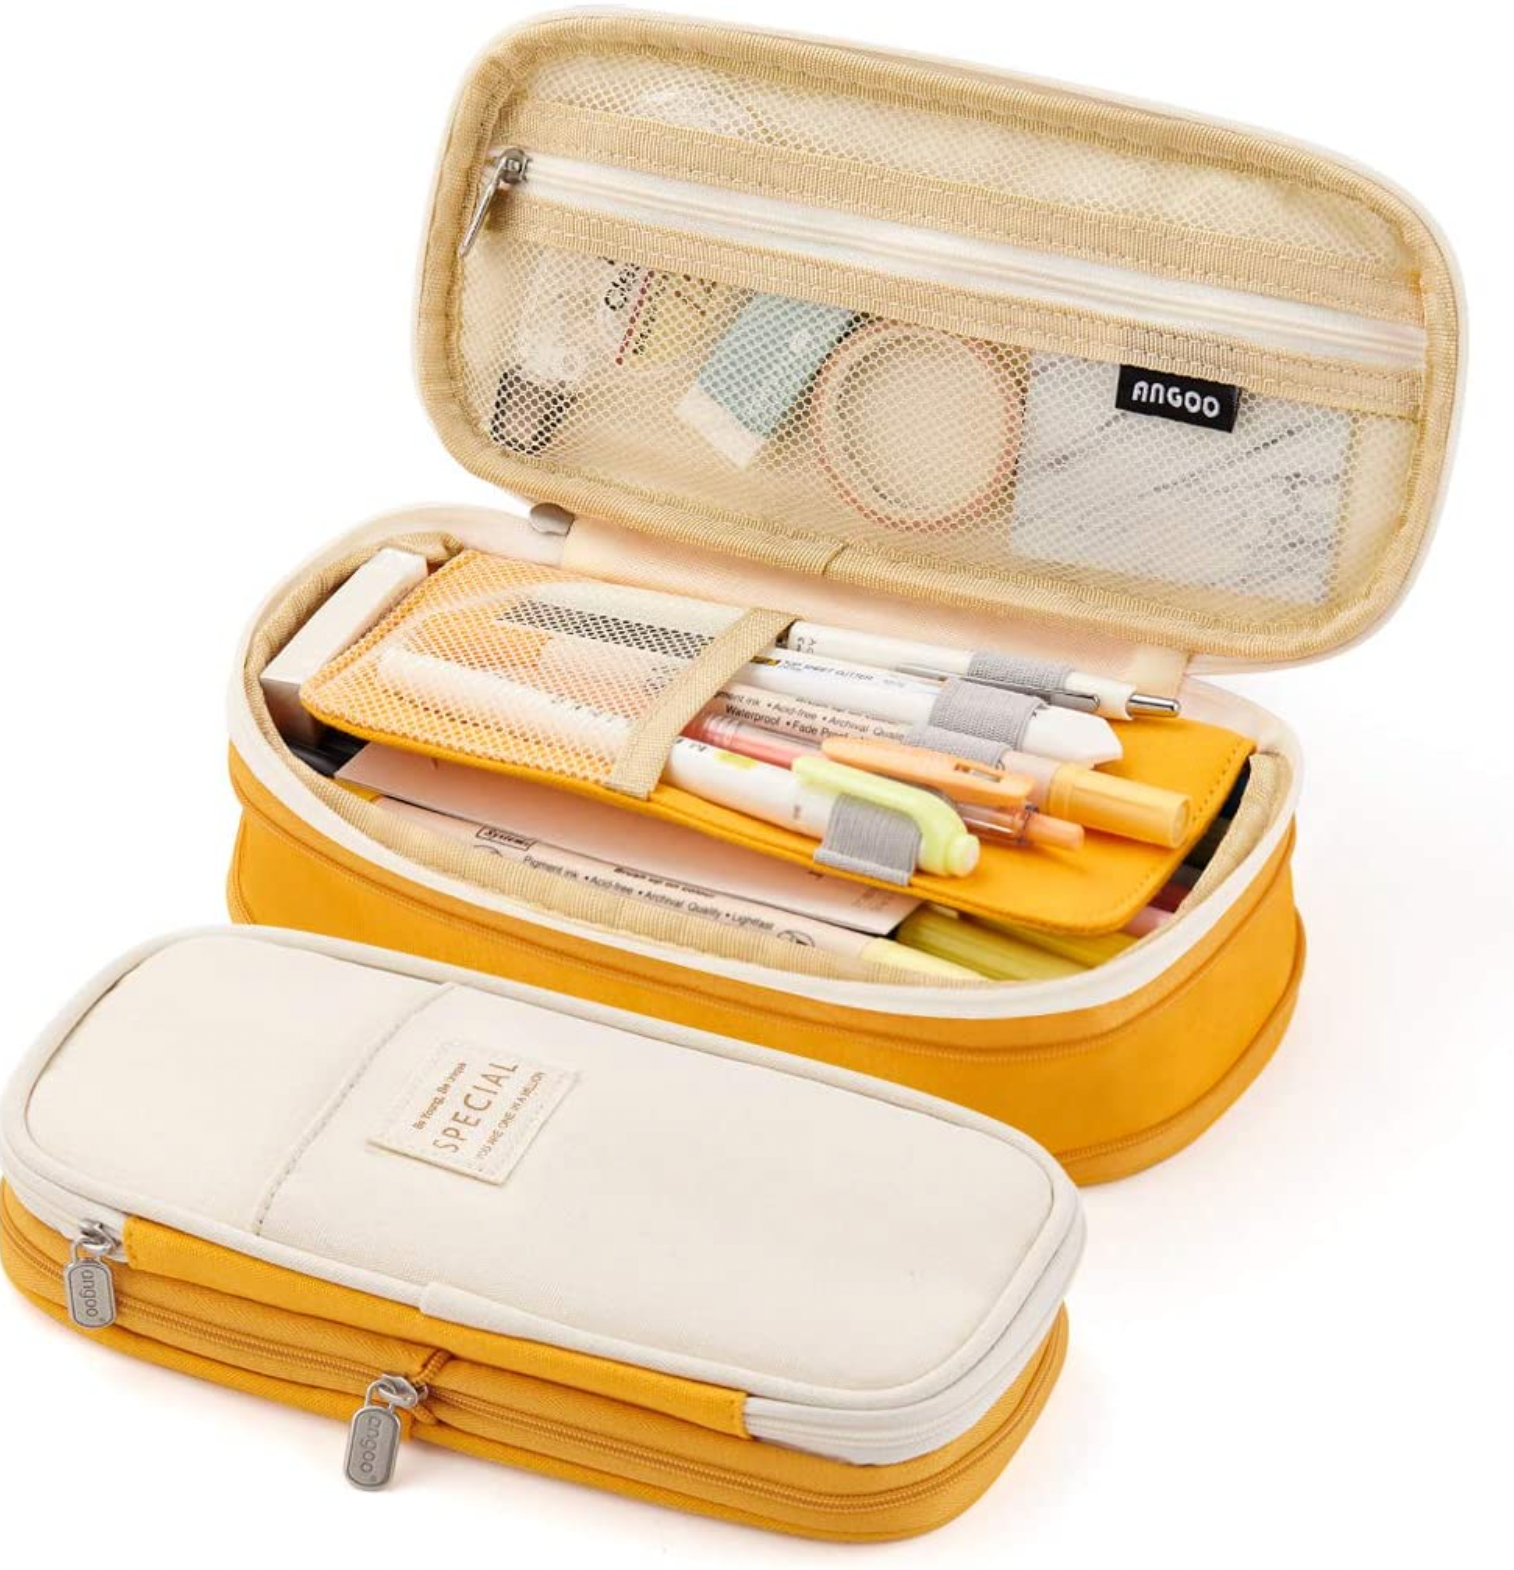 EASTHILL Big Capacity Pencil Pen Case Office College School Large Storage High Bag Pouch Holder Box Organizer Yellow Orange